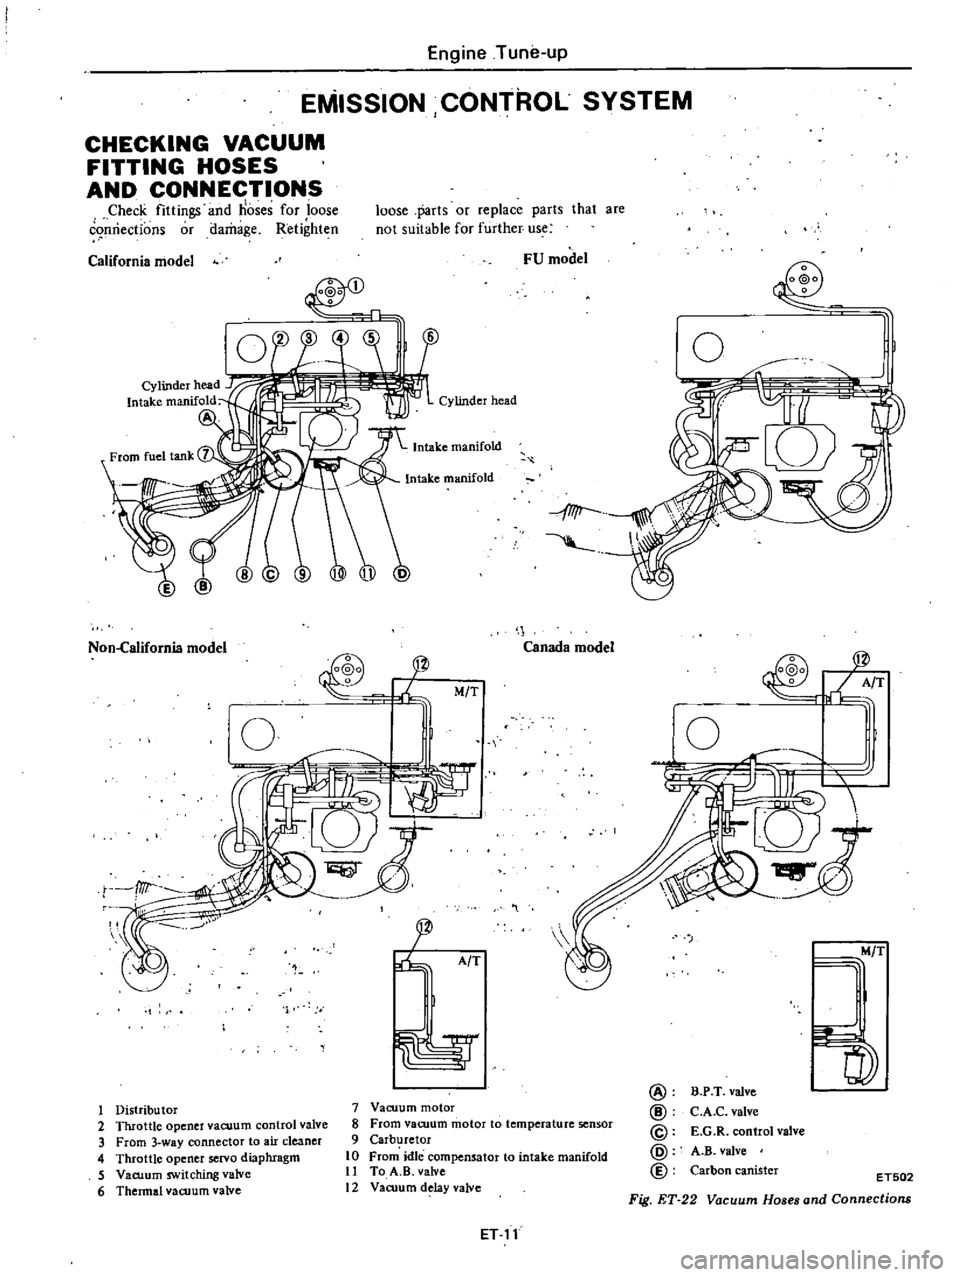 DATSUN 210 1979 Owners Manual 
Engine 
Tune

up

EMISSION 
CONTROL 
SYSTEM

CHECKING 
VACUUM

FITTING 
HOSES

AND 
CONNECTIONS

Check

fittings 
and 
hoses 
for

ioose

cqnriections 
or

damage 
Retighten 
loose

parts 
or

replac